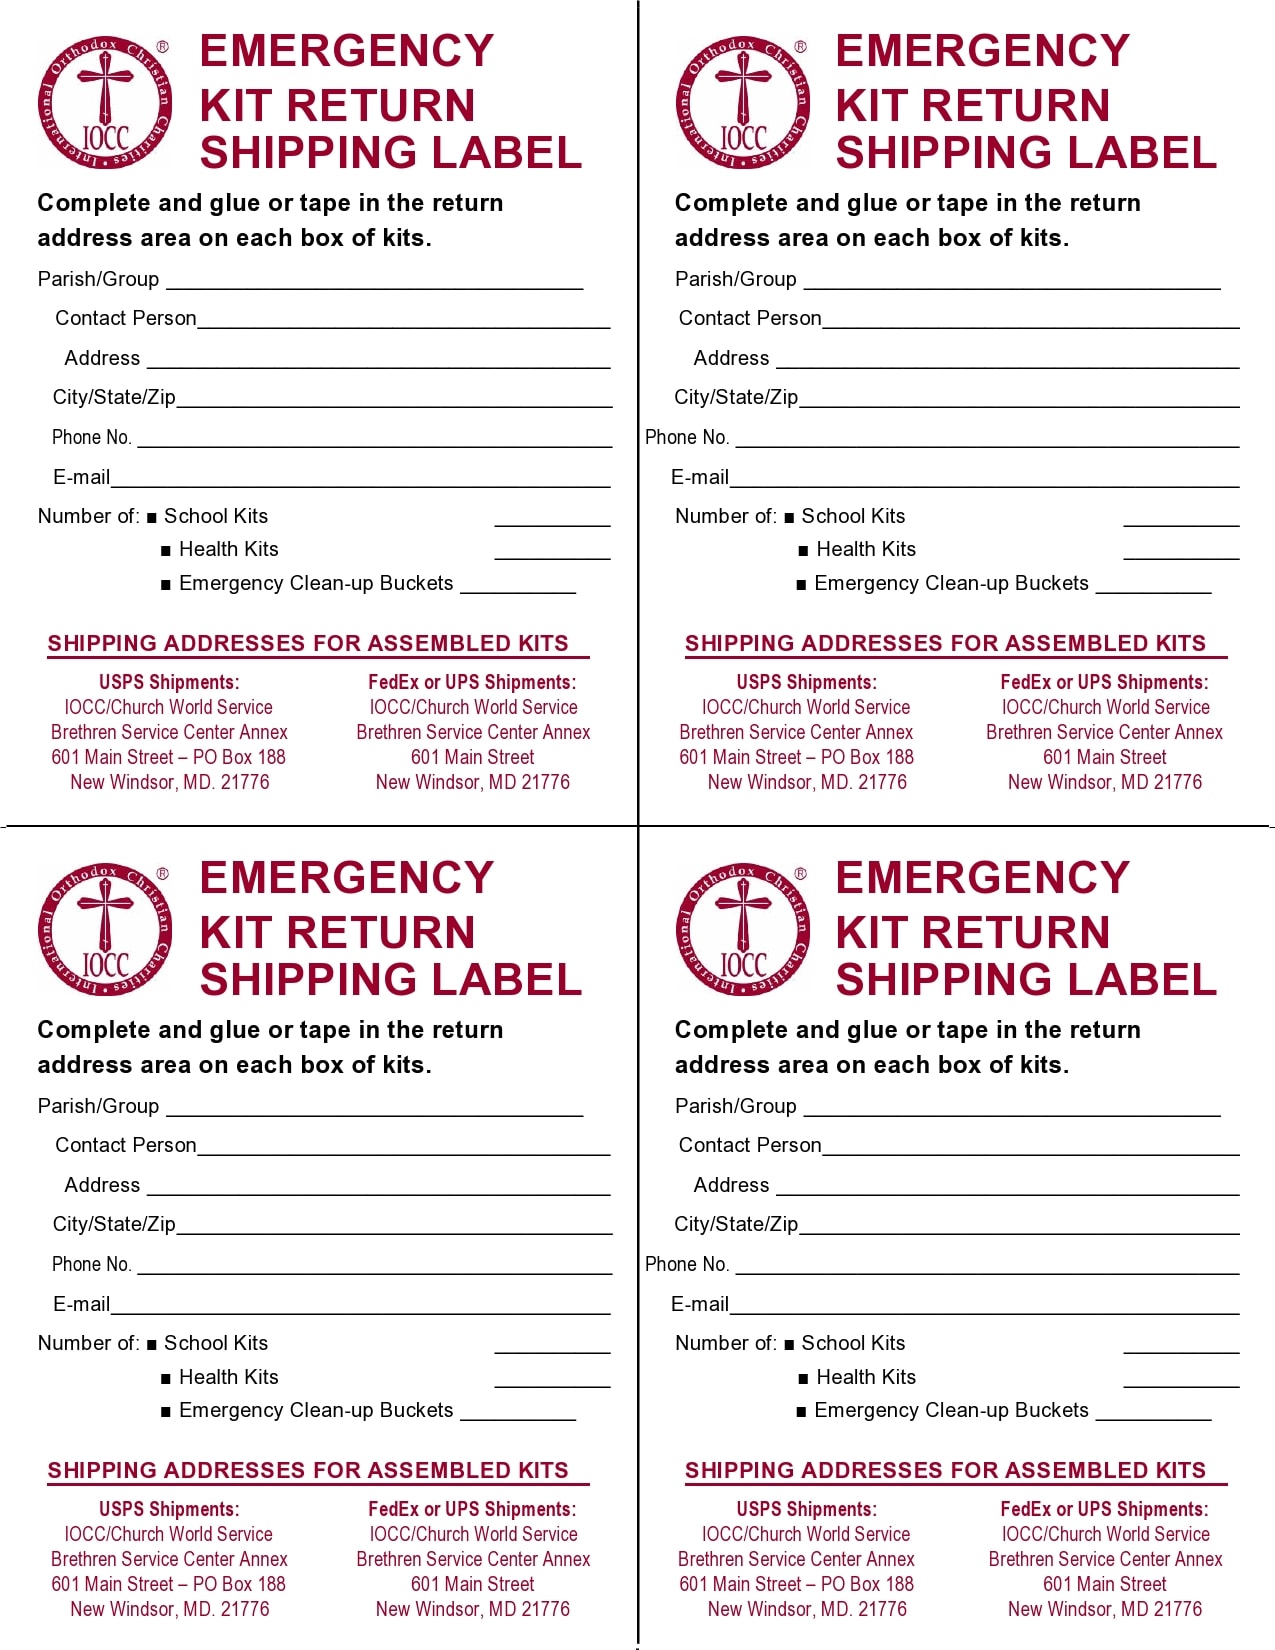 20 Printable Shipping Label Templates (Free) - PrintableTemplates Throughout Usps Shipping Label Template Word